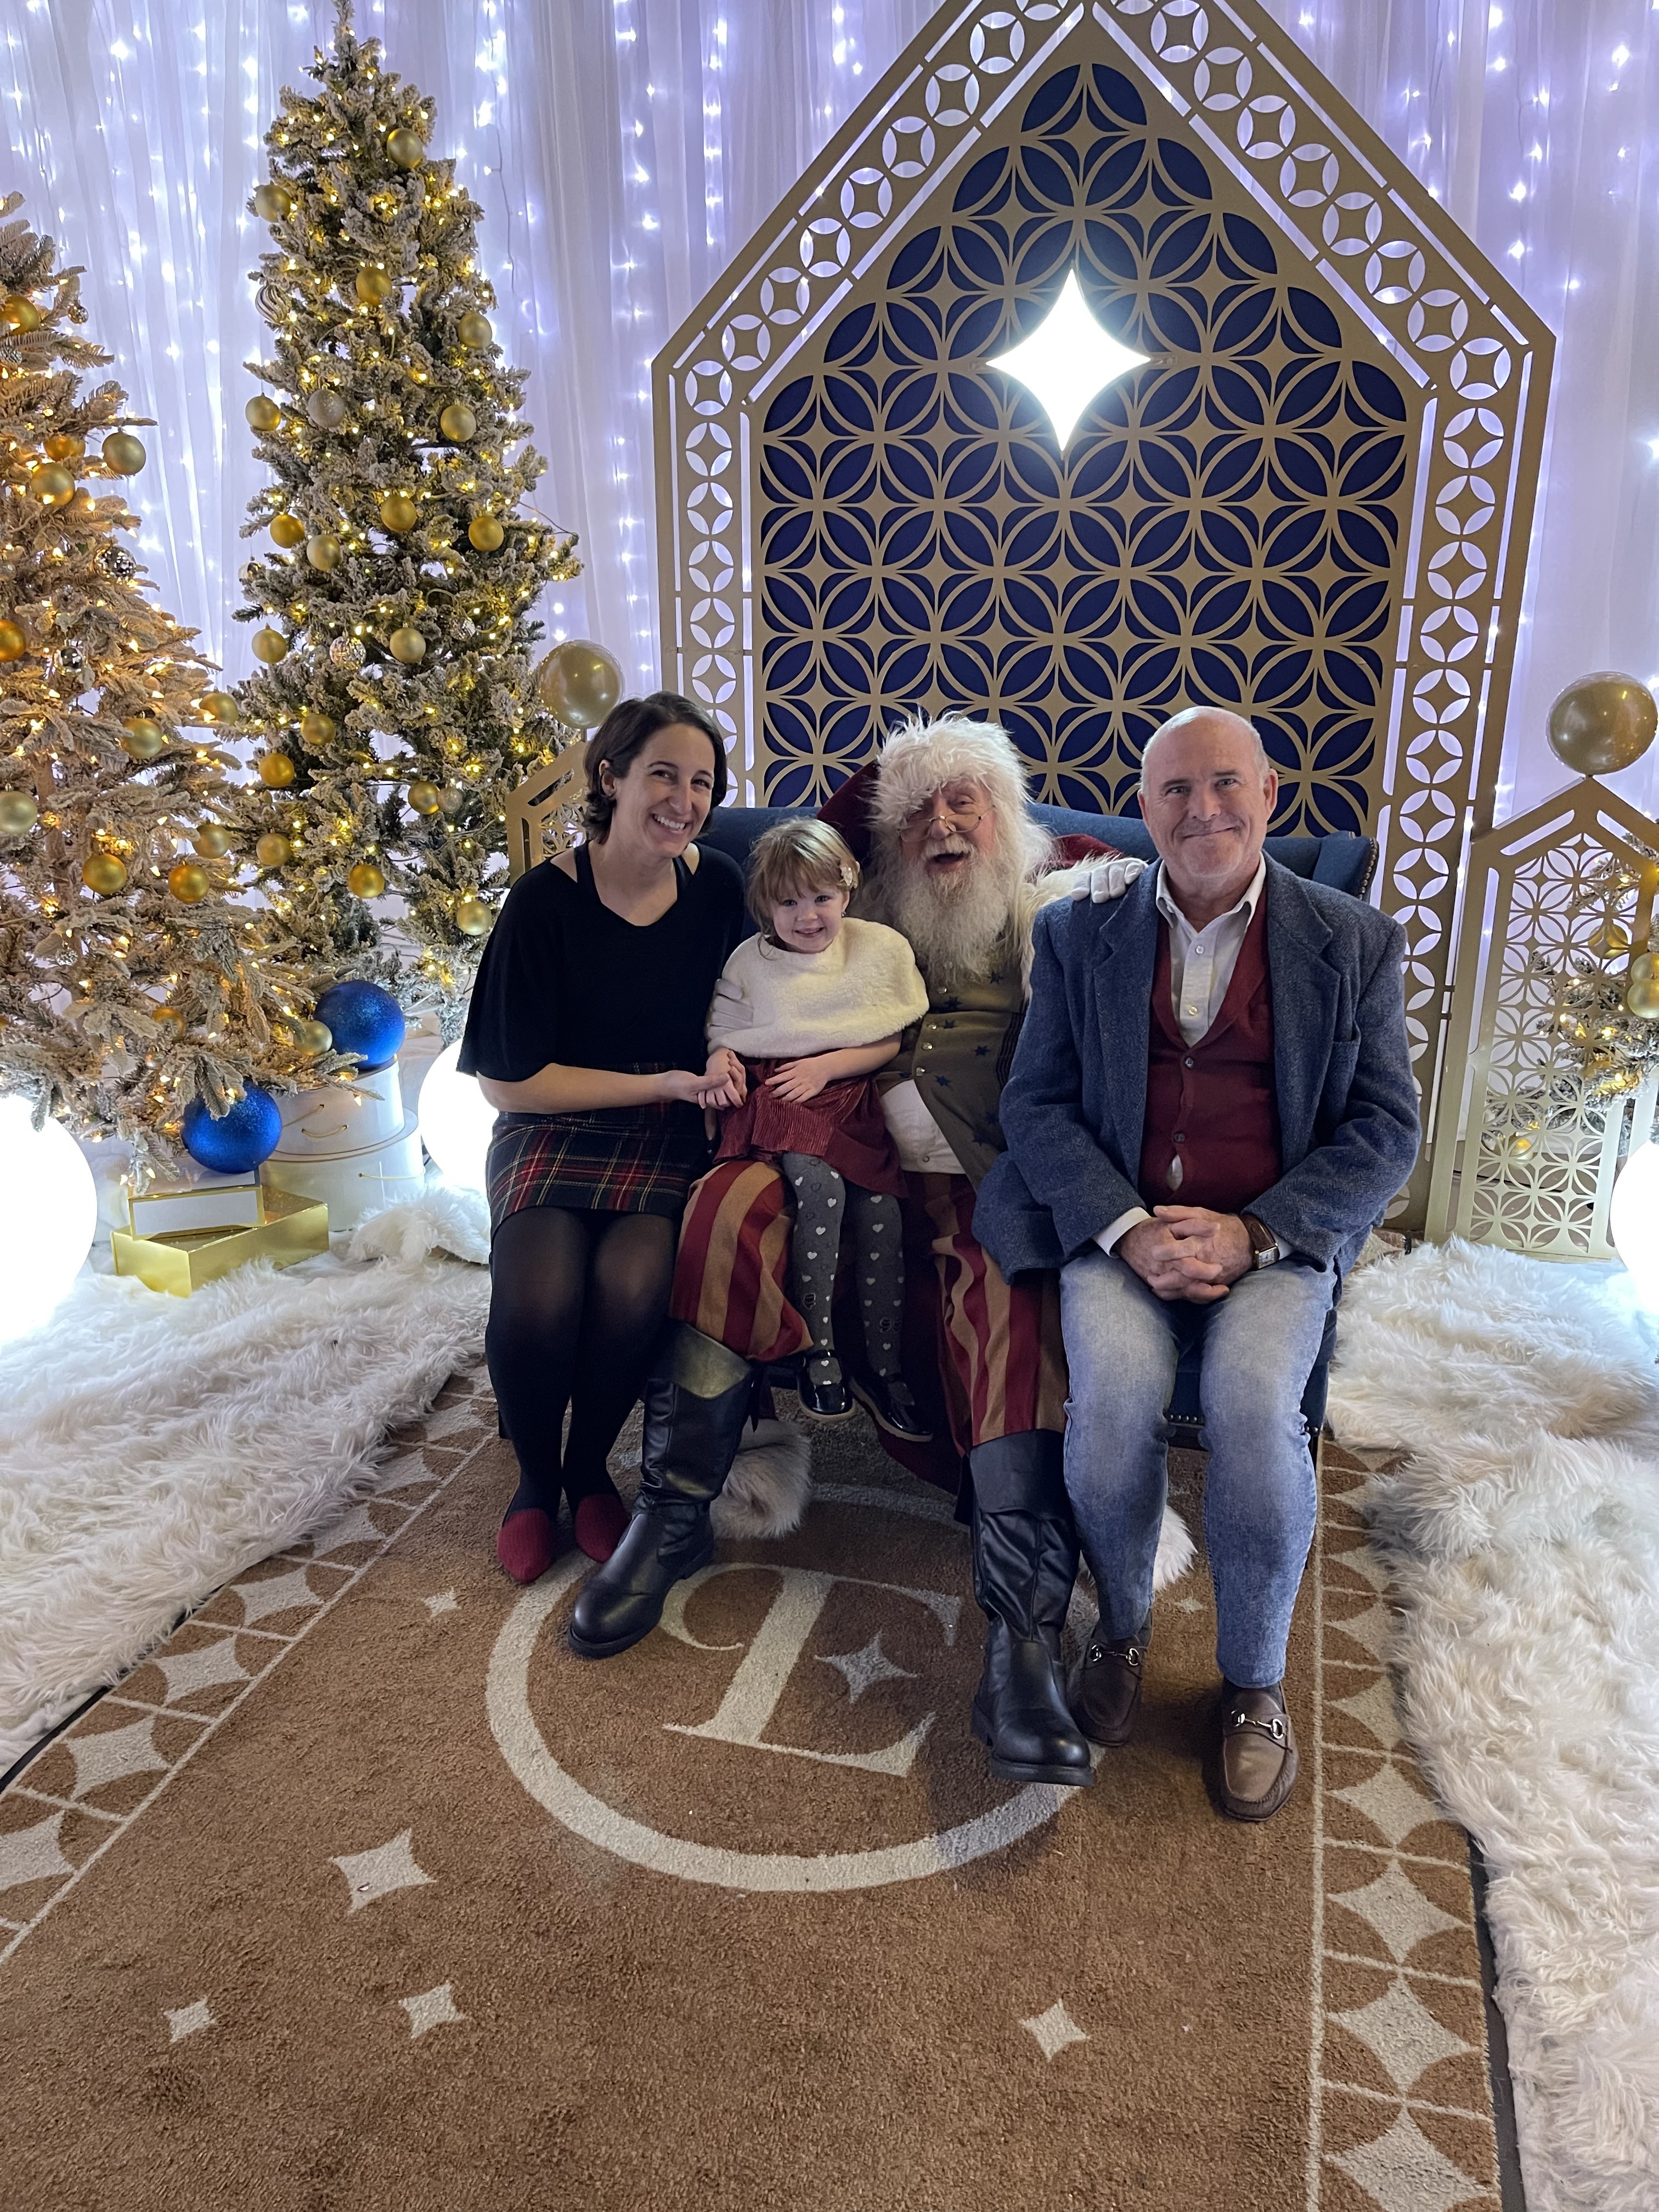 Julia, her husband, and daughter Emily sitting with Santa Claus at the St. Pete Enchant event.